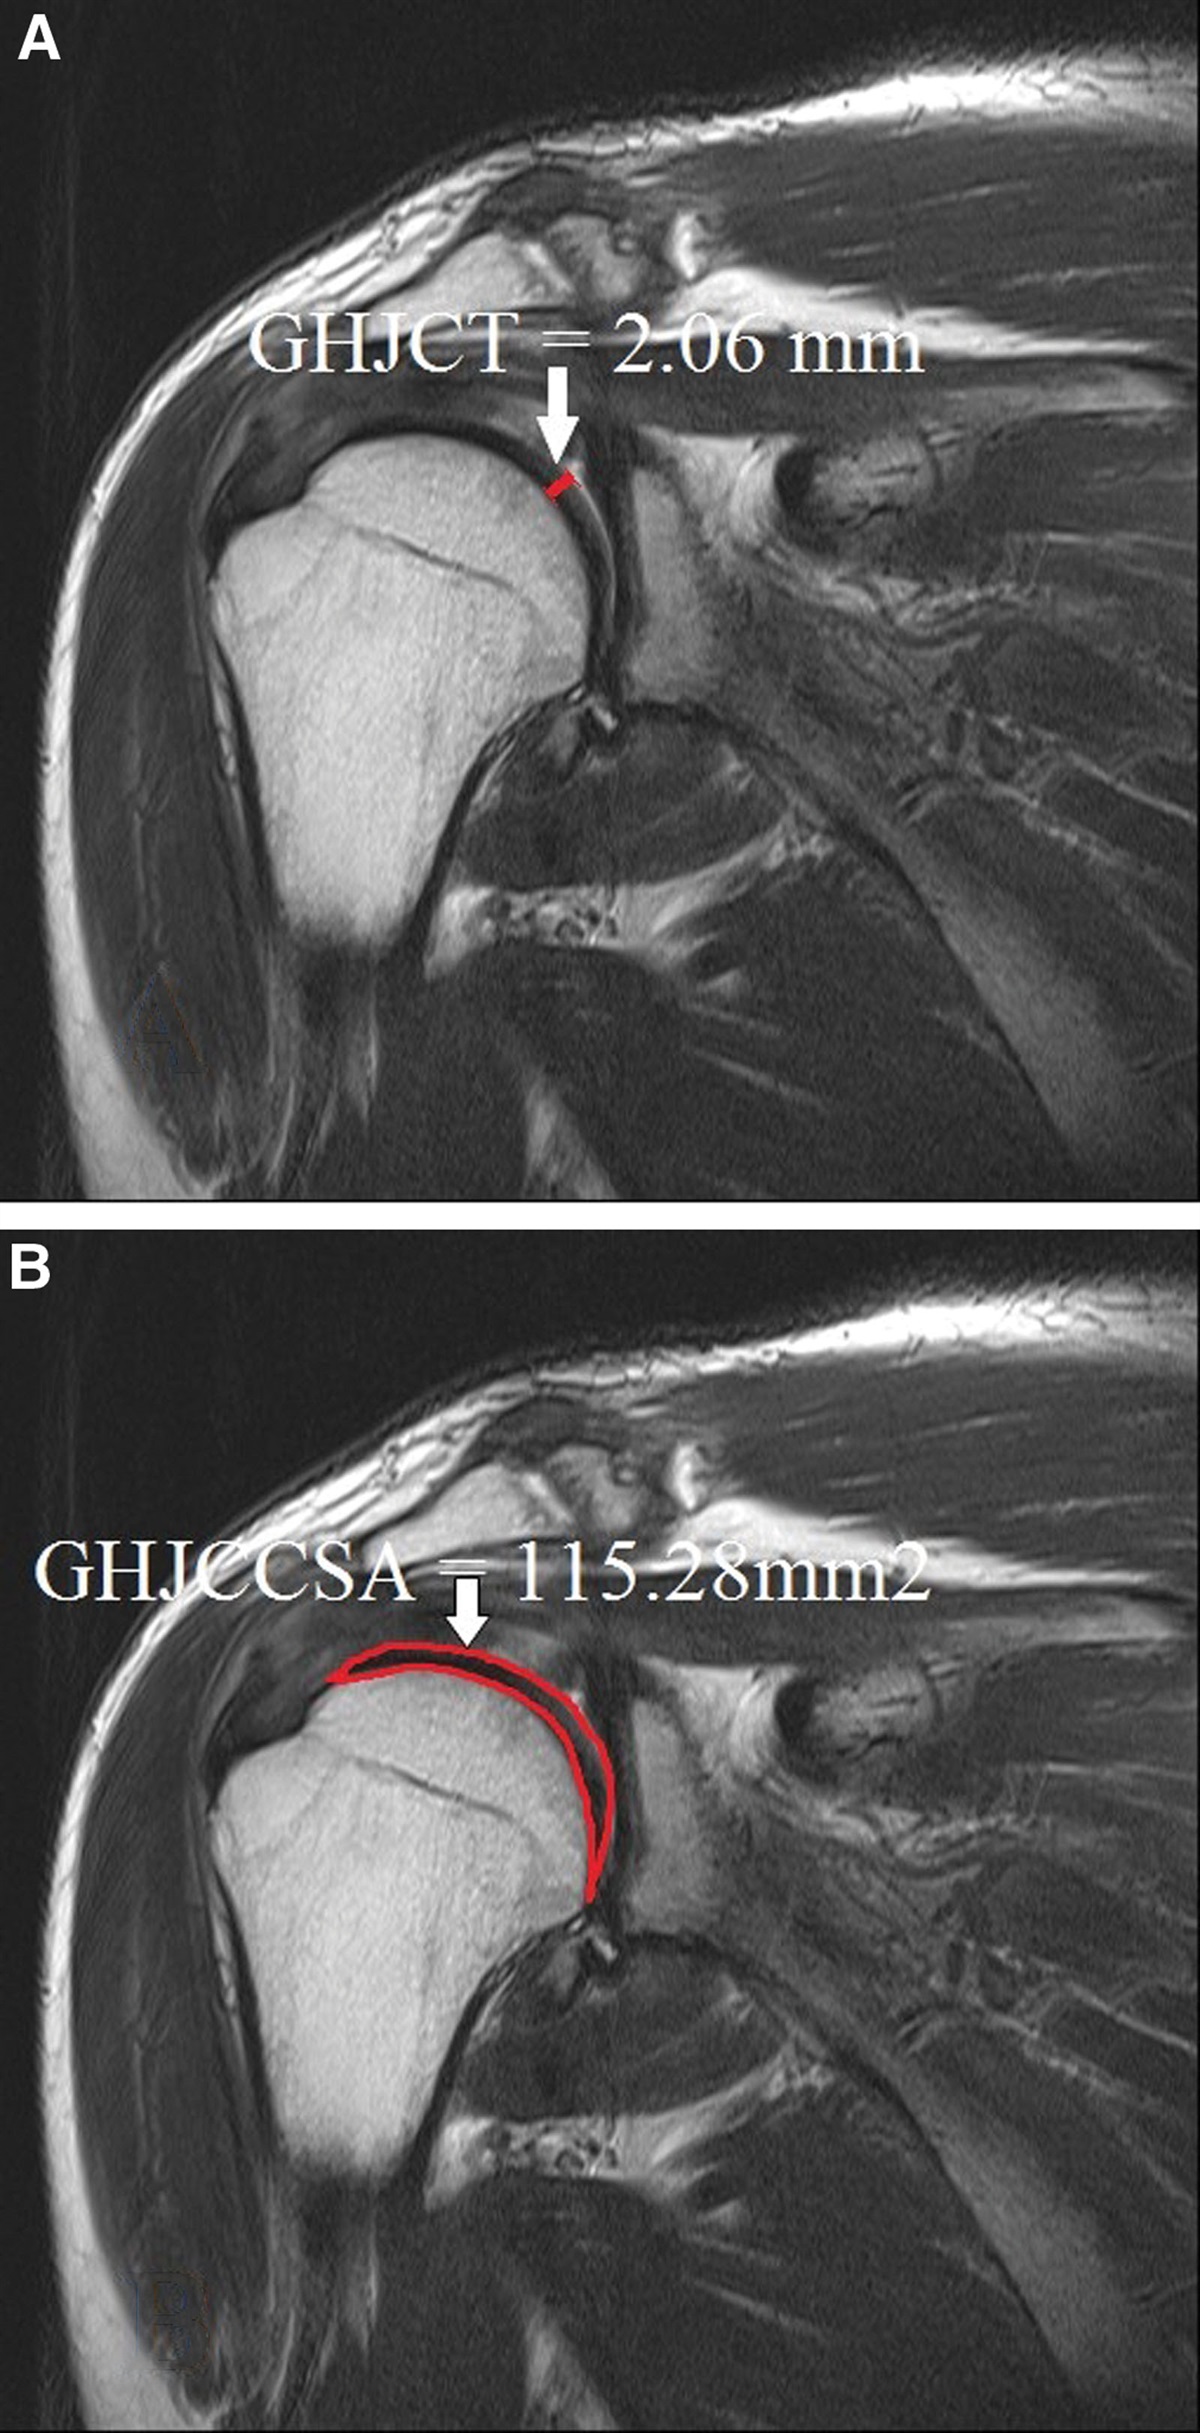 The value of the glenohumeral joint cross-sectional area as a morphological parameter of glenohumeral osteoarthritis